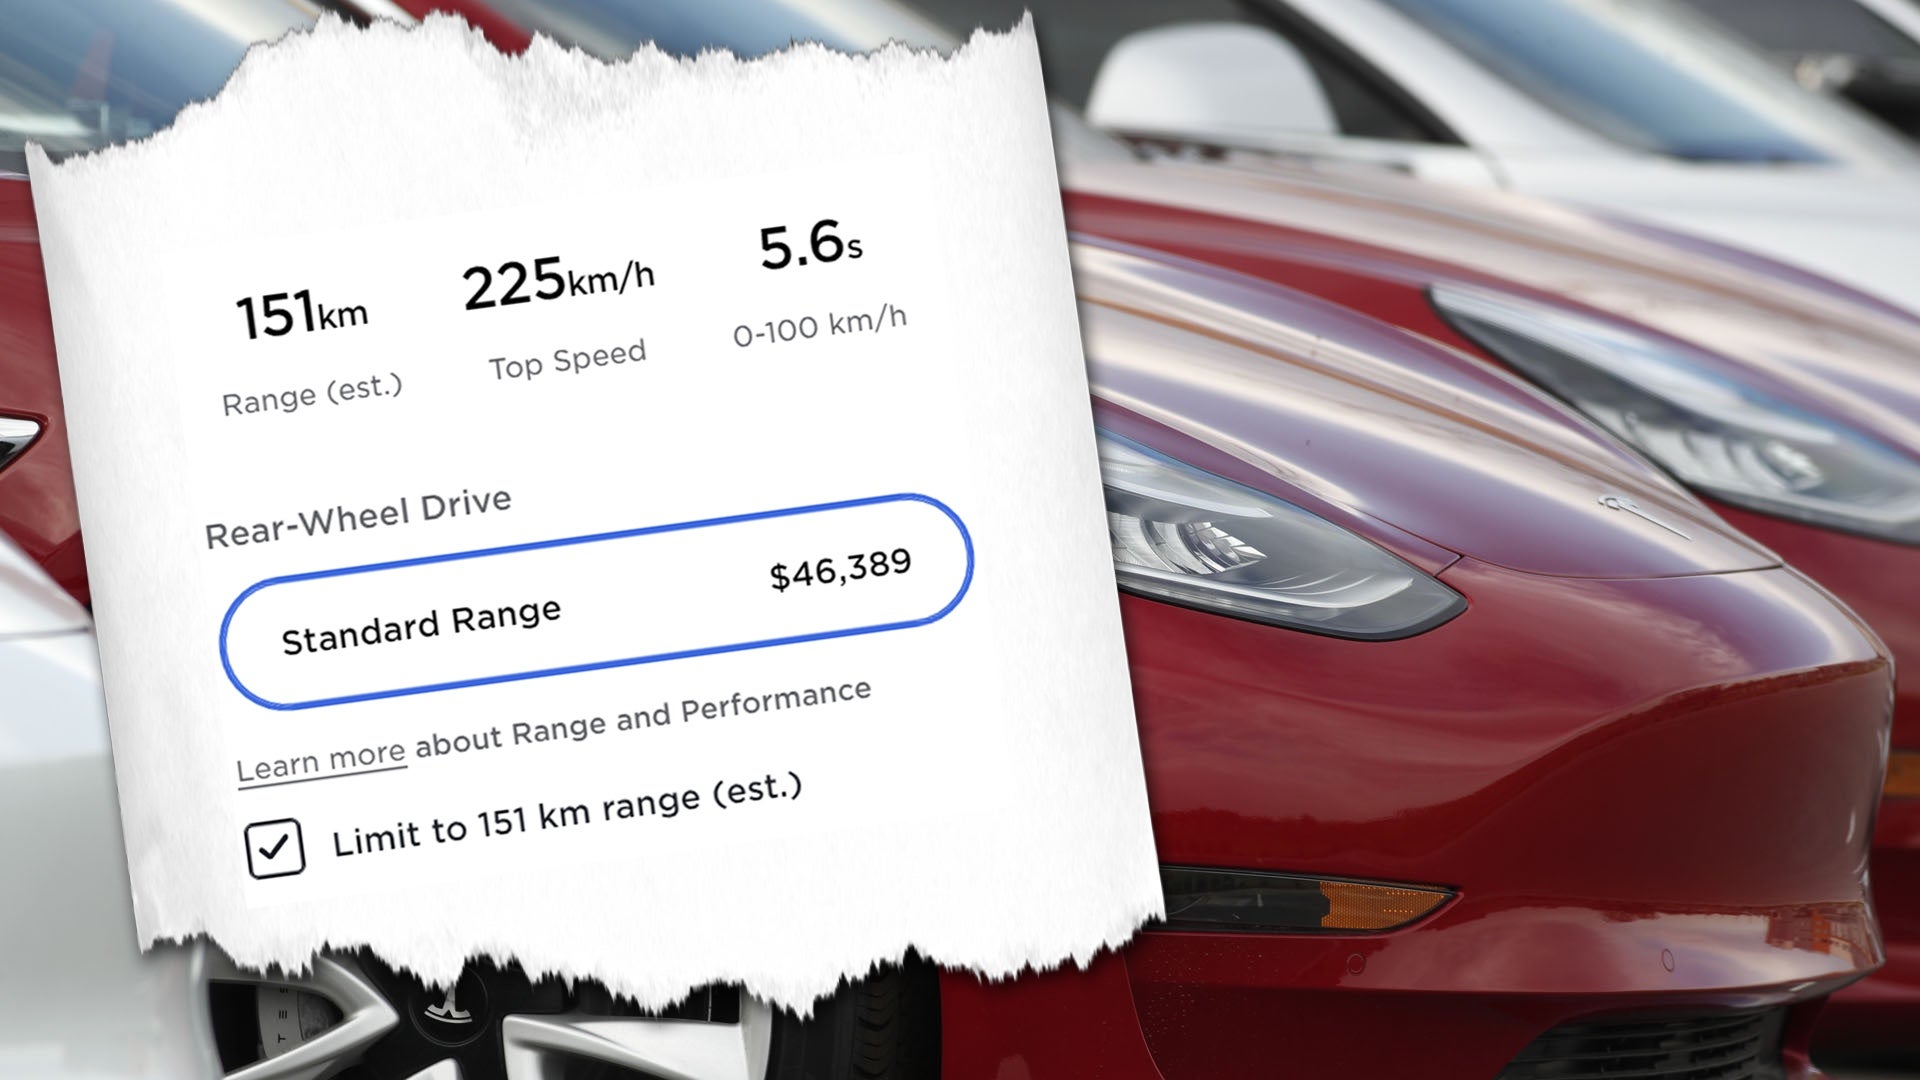 Earlier this year, we told you about Tesla's ultra-low range Model 3 sold exclusively in Canada. The no-frills EV has only 94 miles (151 kilometers) o